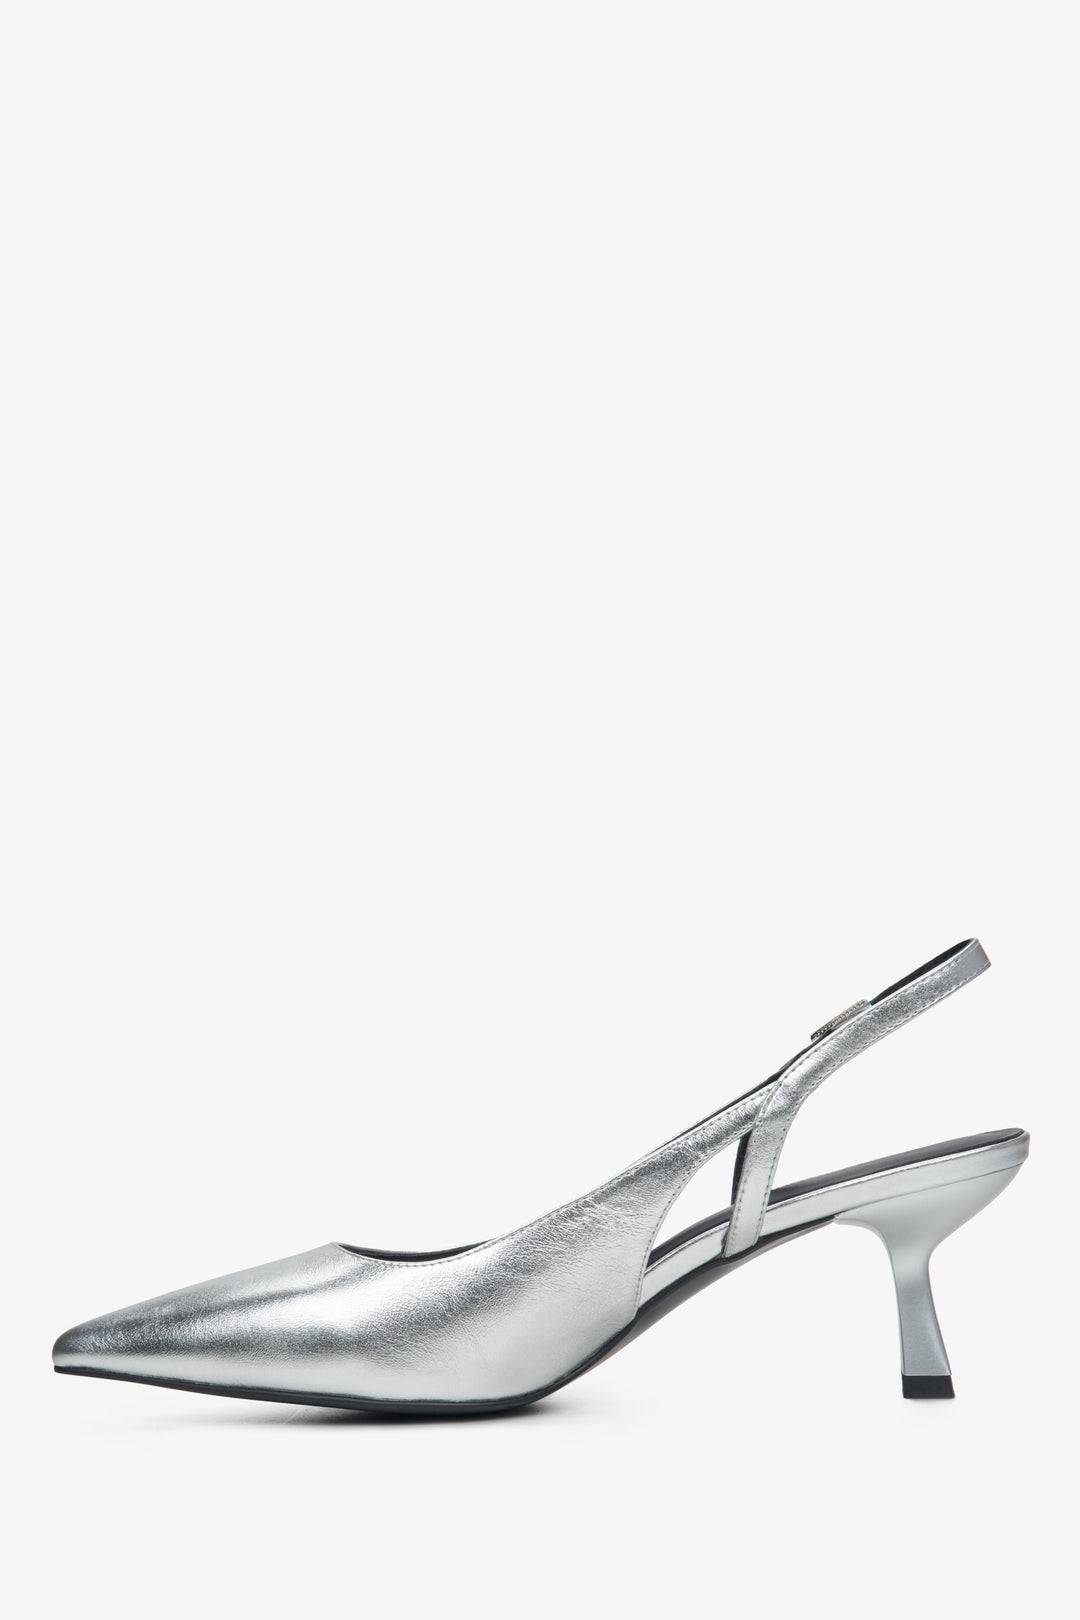 Silver leather women's slingback shoes by Estro X MustHave - side profile of the shoe.